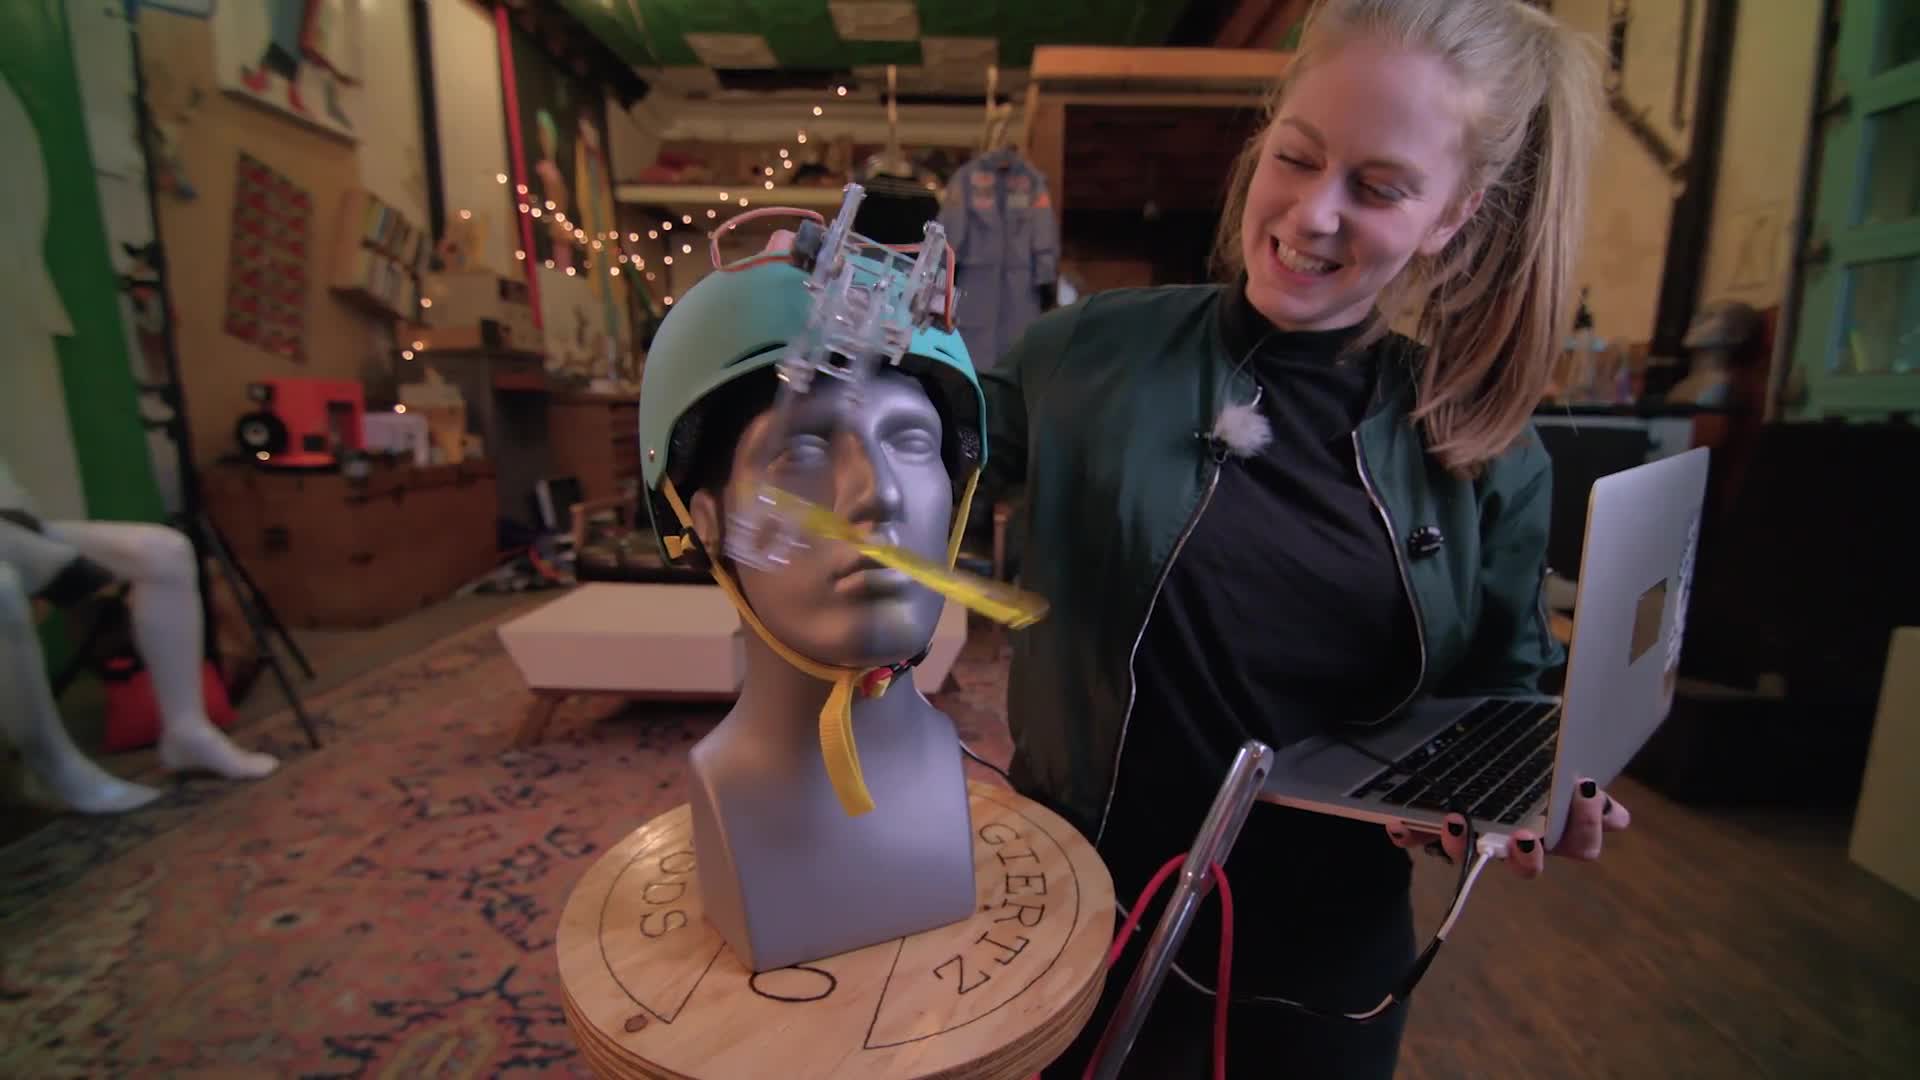 Koncentration lade Credential Watch Robot Queen Simone Giertz Tours Her Mad Laboratory | WIRED